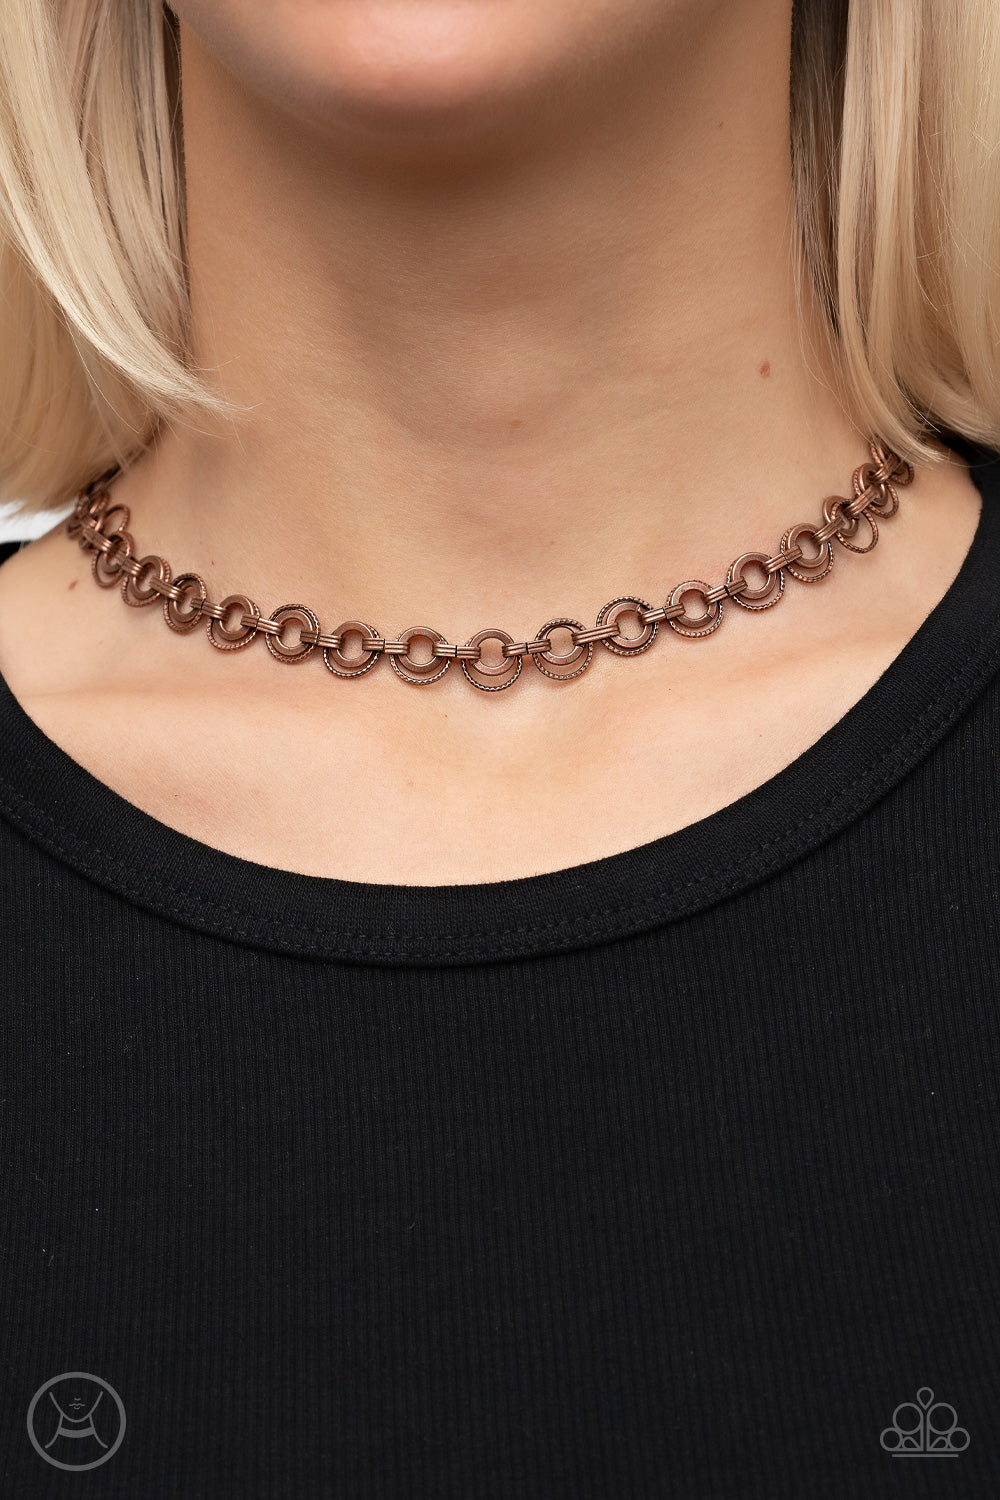 Paparazzi Accessories Grit and Grind - Copper Dainty pairs of textured copper hoops and rings link with pinched copper fittings around the neck, resulting in a gritty vibe. Features an adjustable clasp closure. Sold as one individual choker necklace. Incl